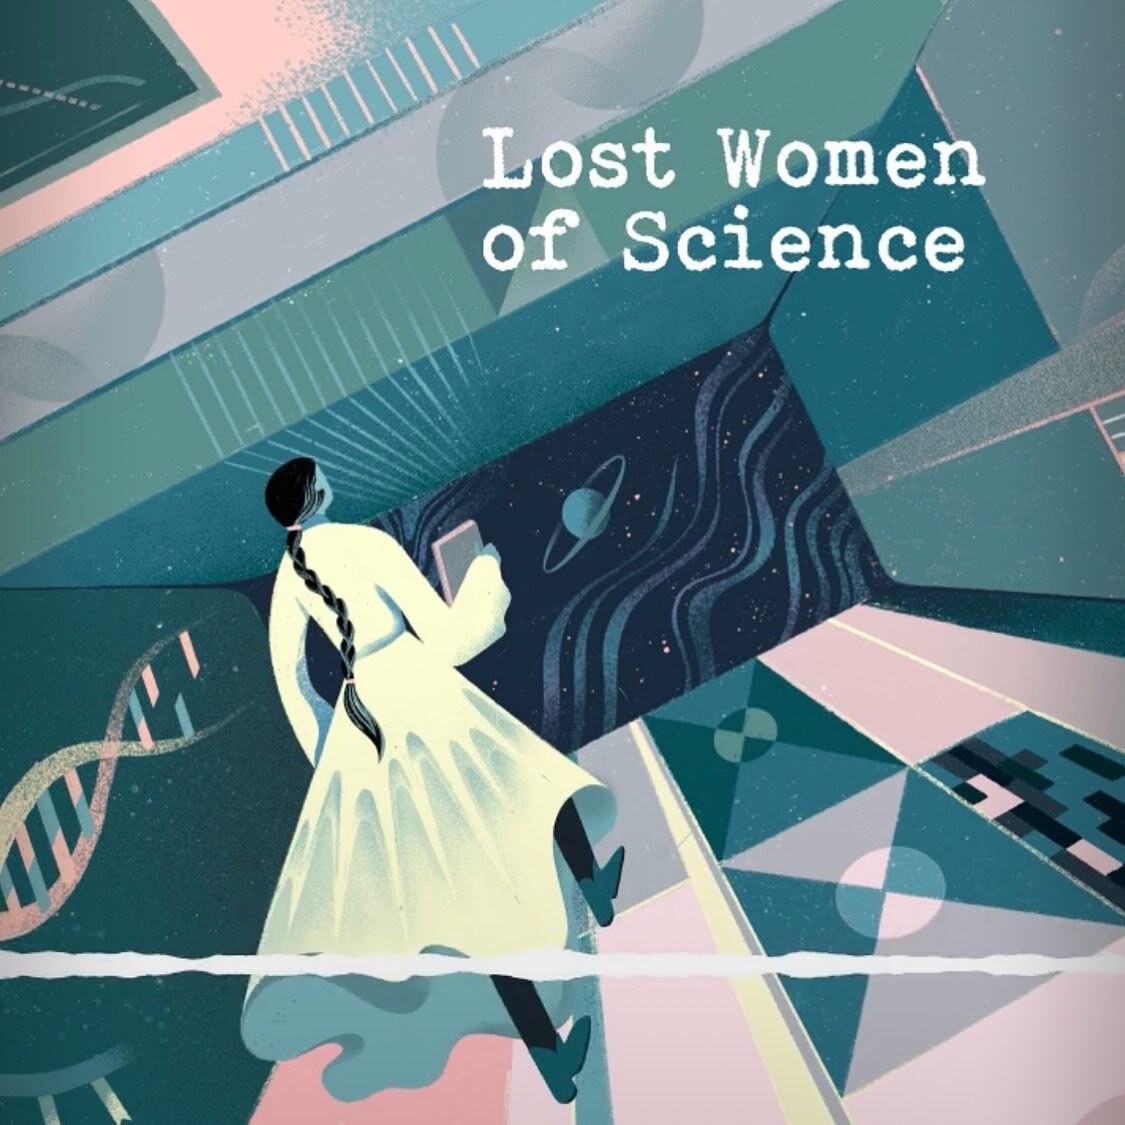 Honoured to be the composer of the @lostwomenofsci podcast, which tells the remarkable stories of forgotten women of science. 

Our first season focused on Dr Dorothy Hansine Andersen who was the first person to discover Cystic Fibrosis. The second s